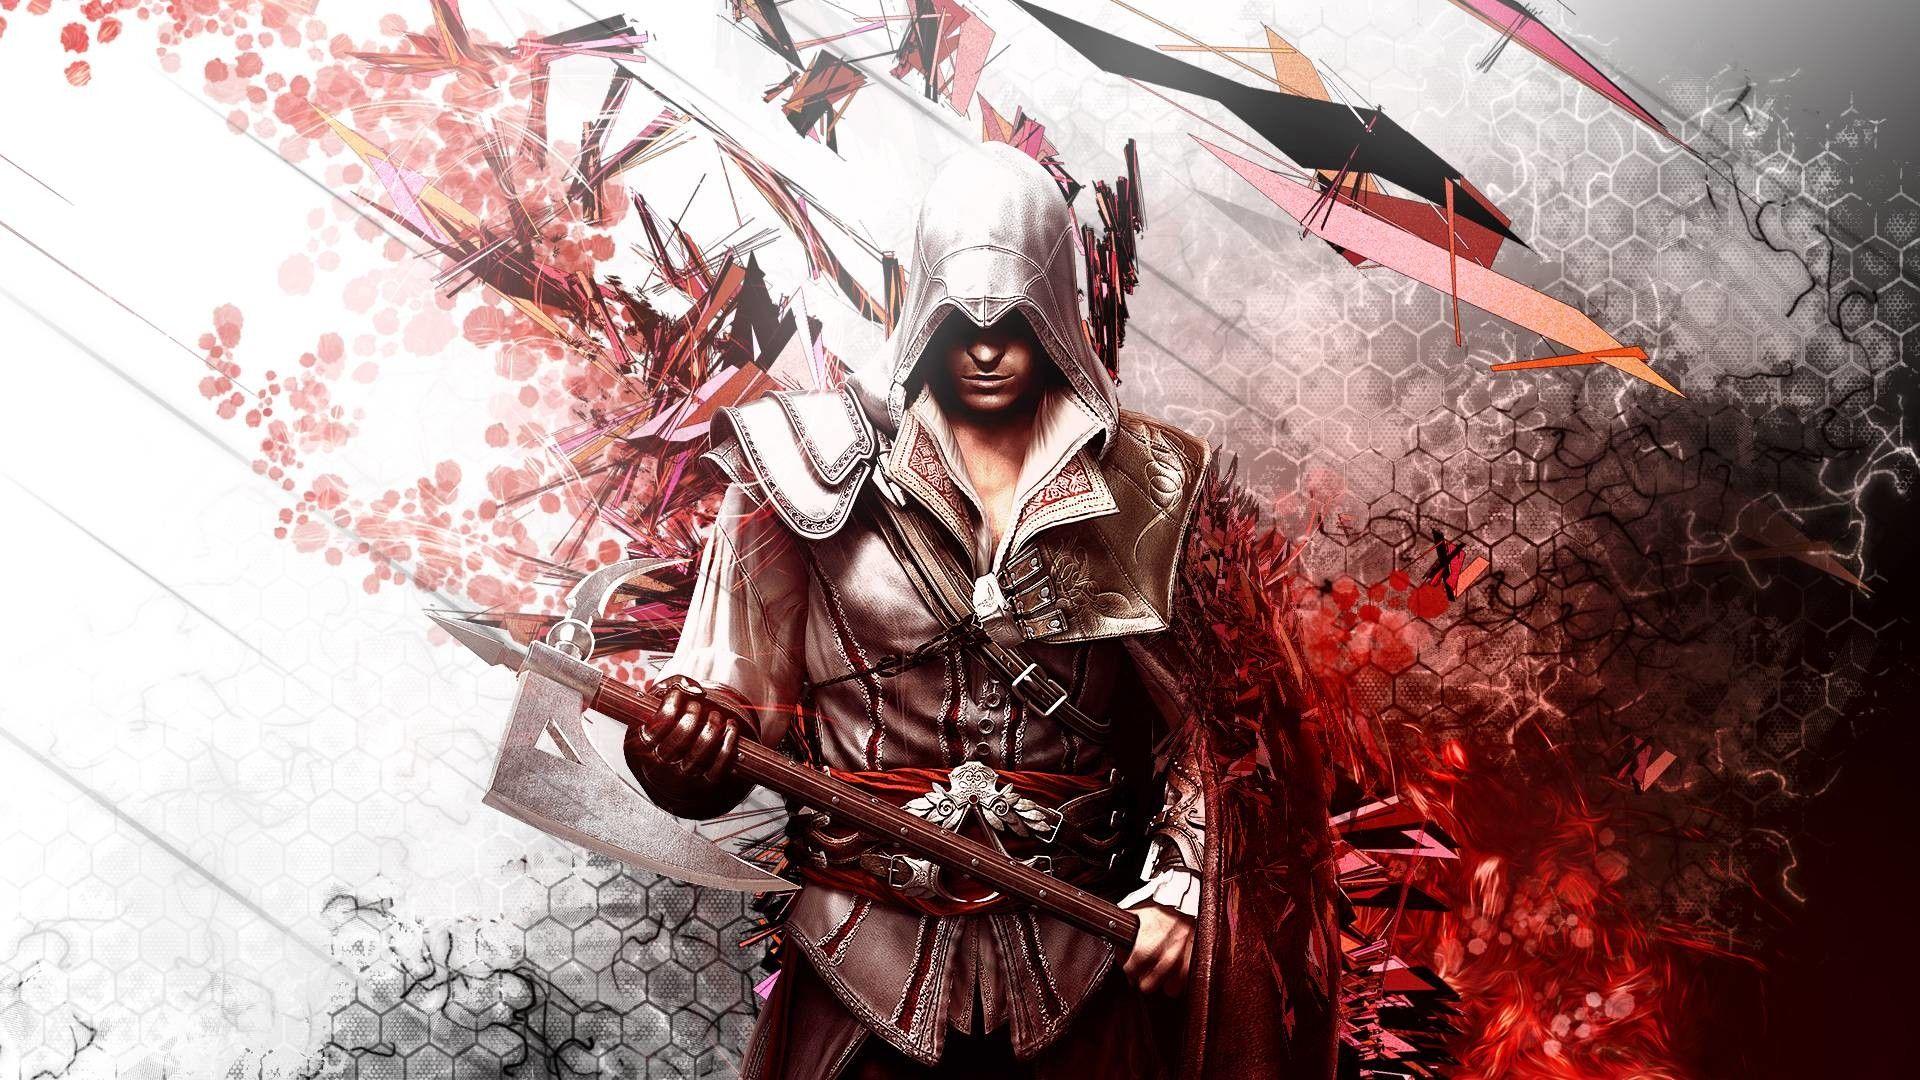 Assassin's Creed Laptop Wallpapers - Top Free Assassin's Creed Laptop ...